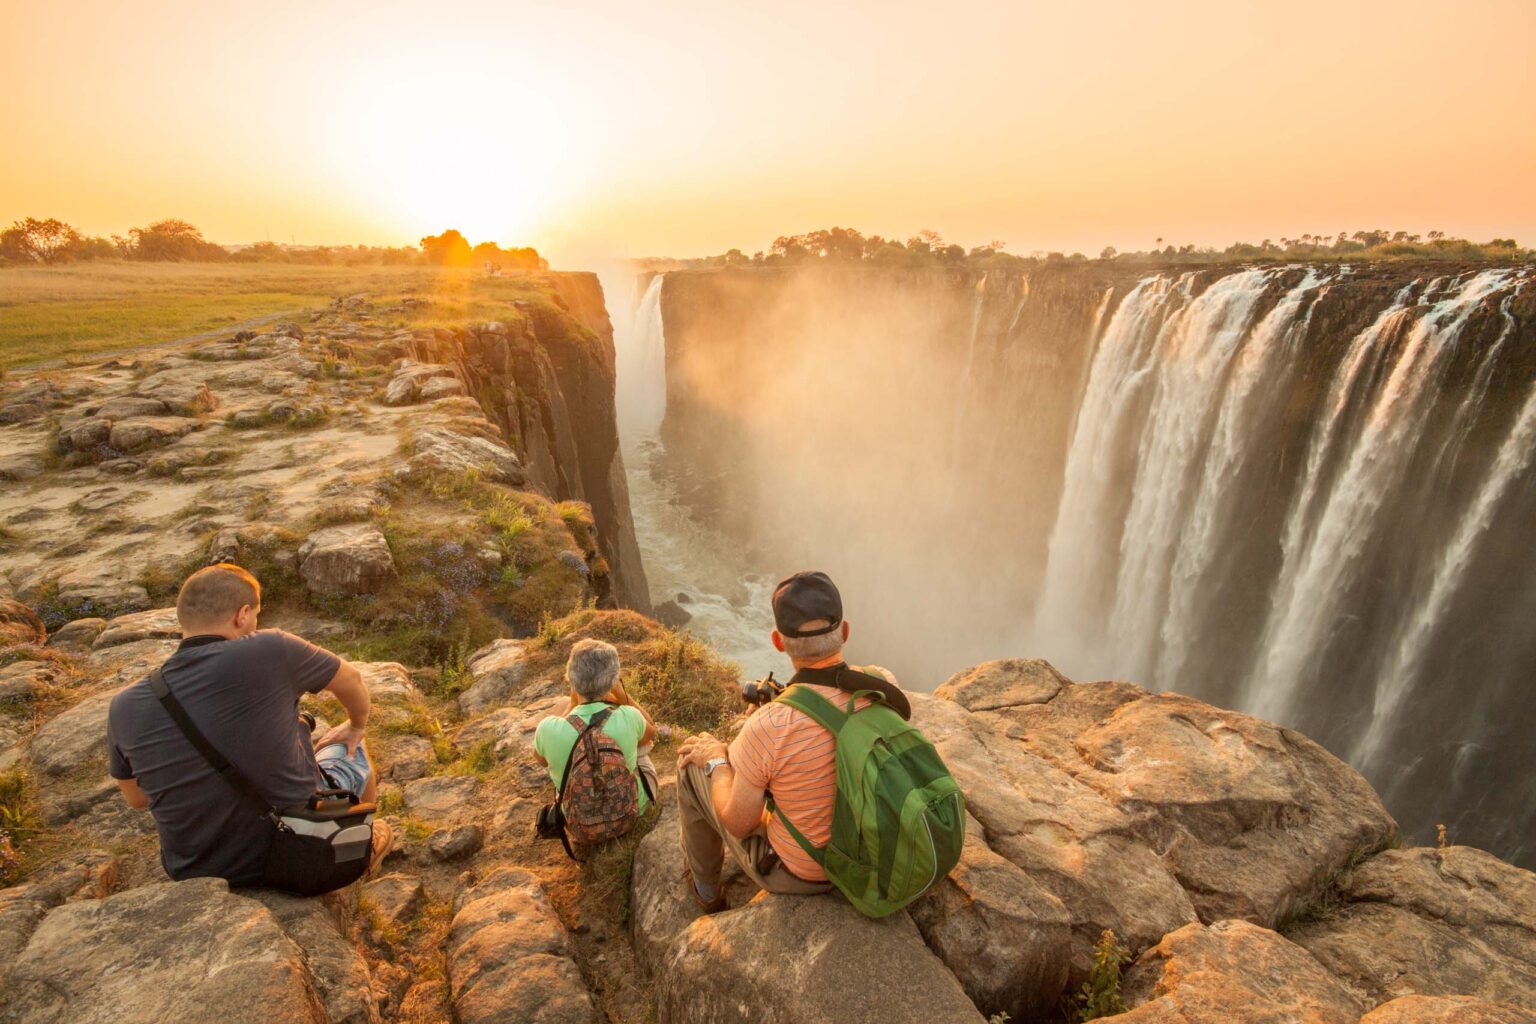 A group of travelers observing Victoria Falls.